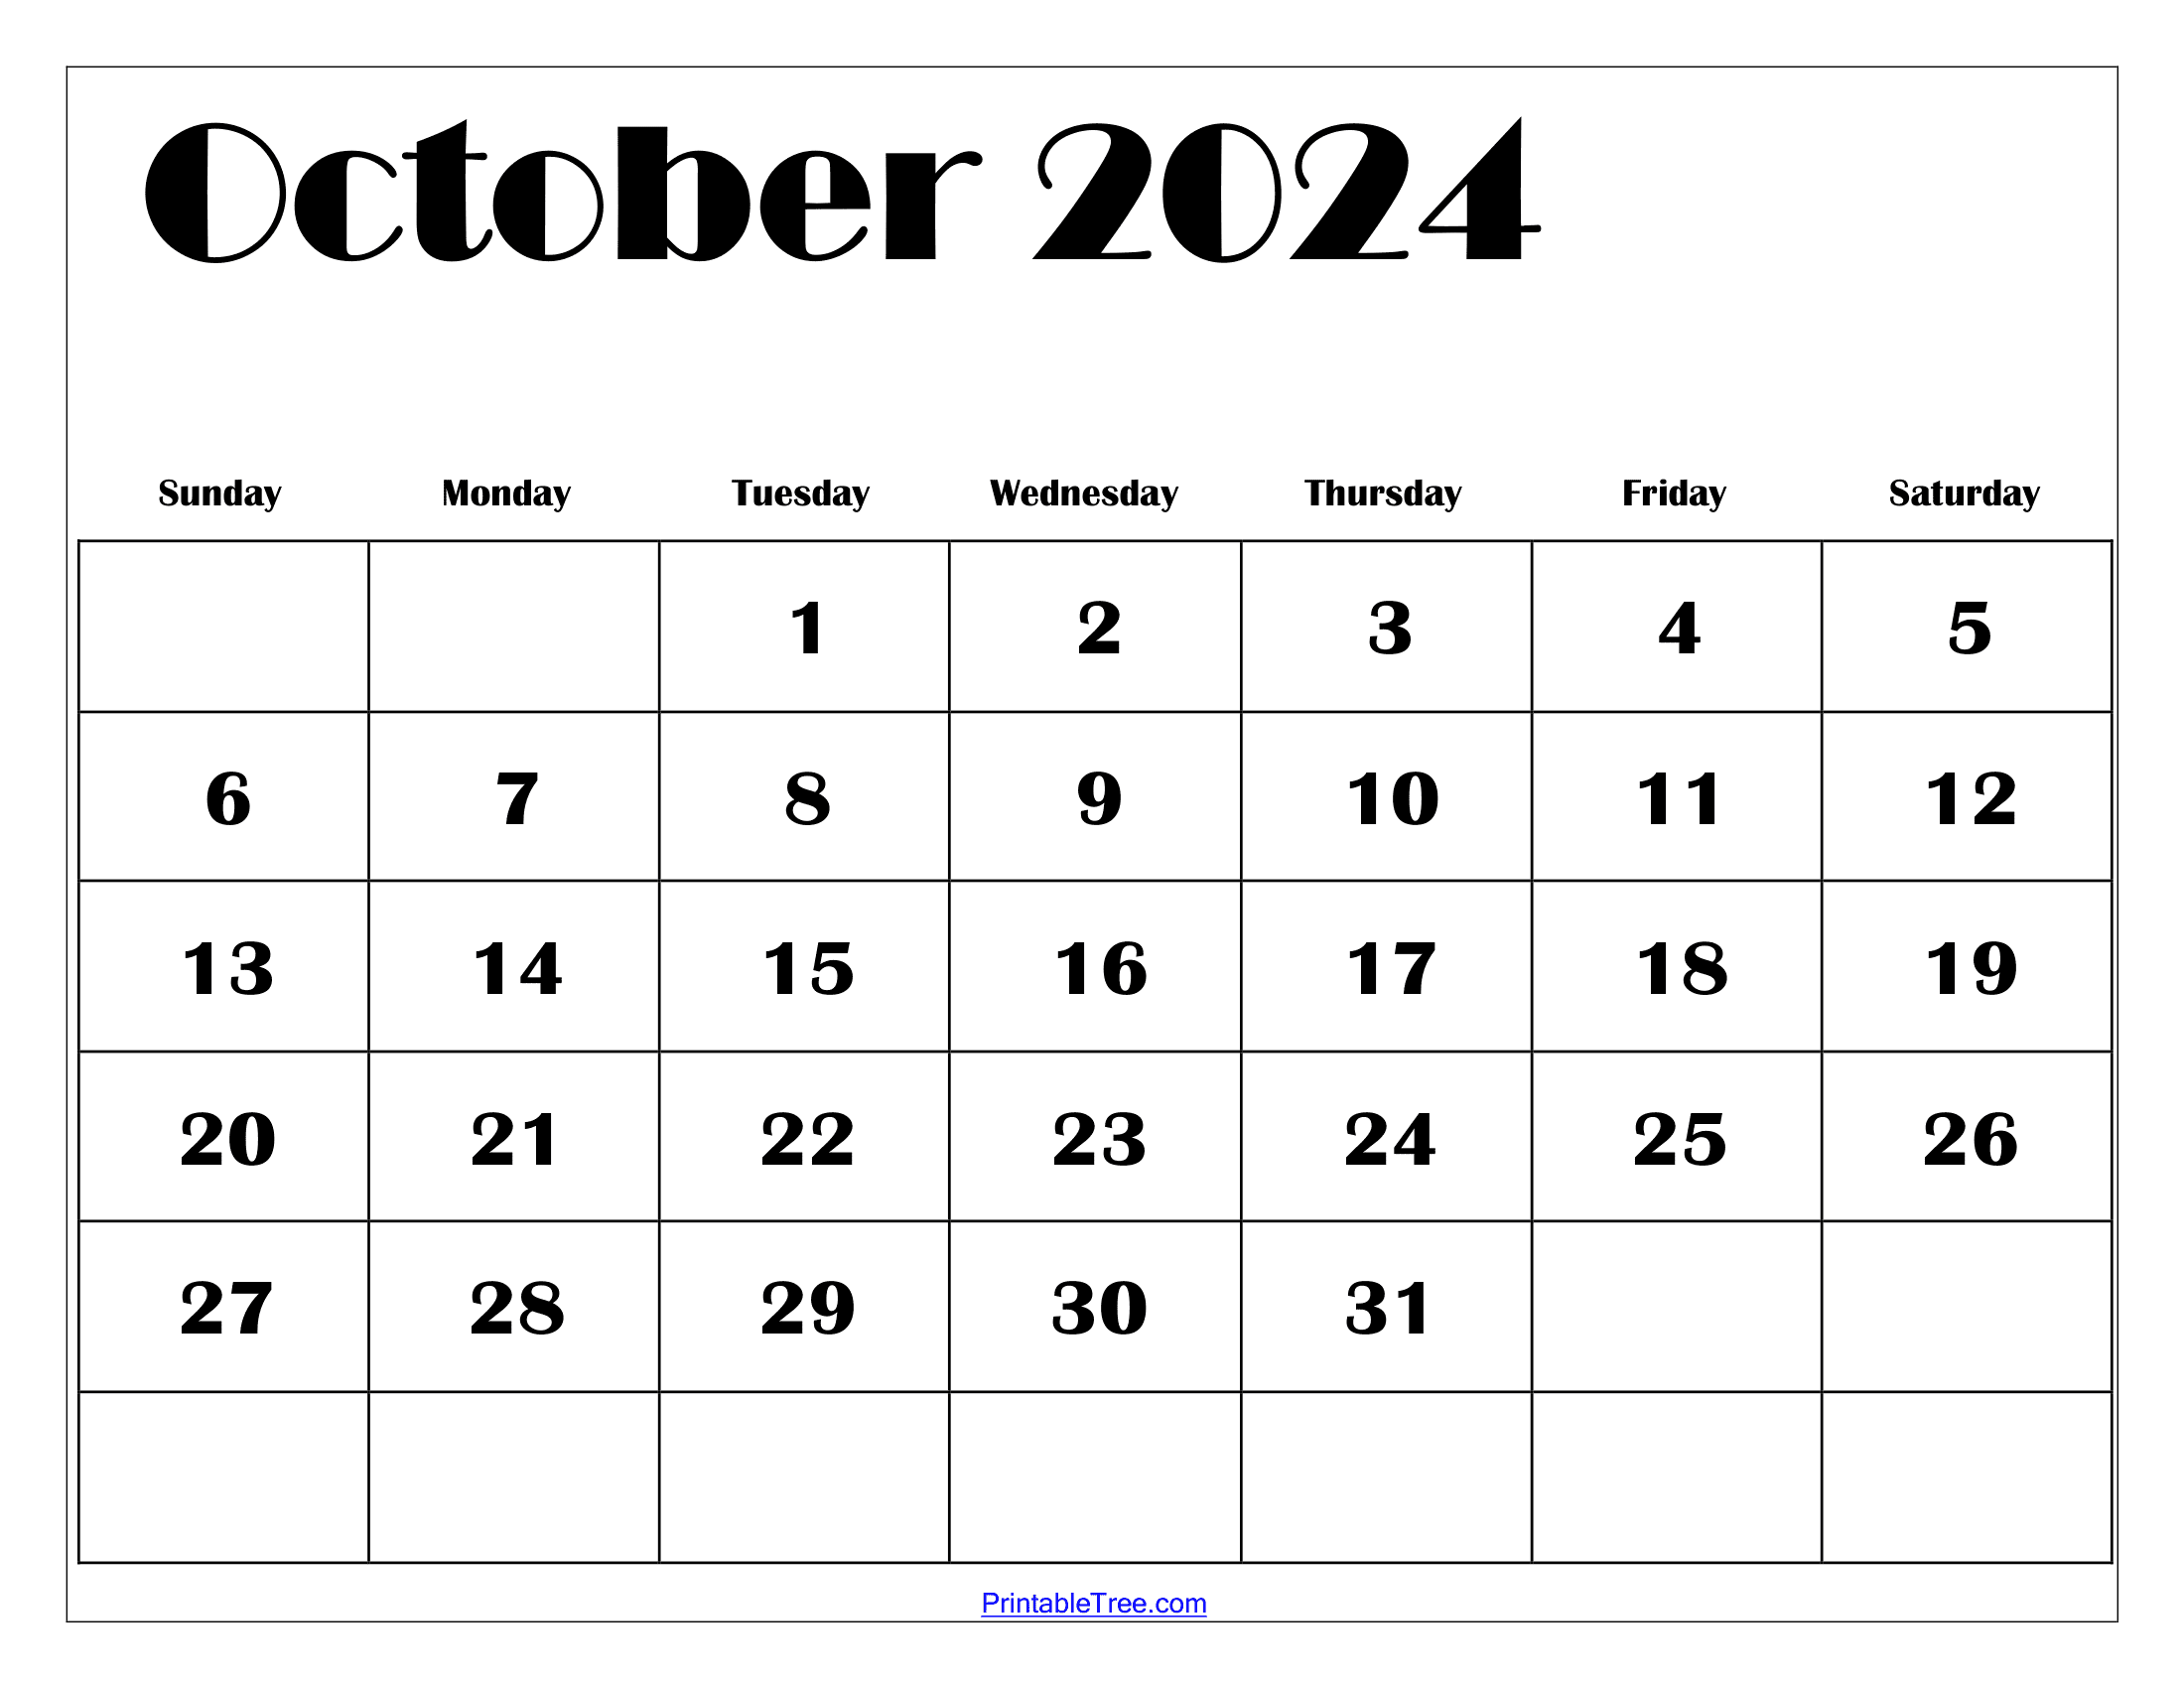 October 2024 Calendar Printable Pdf Free Templates With Holidays pertaining to Free Printable Appointment Calendar October 2024